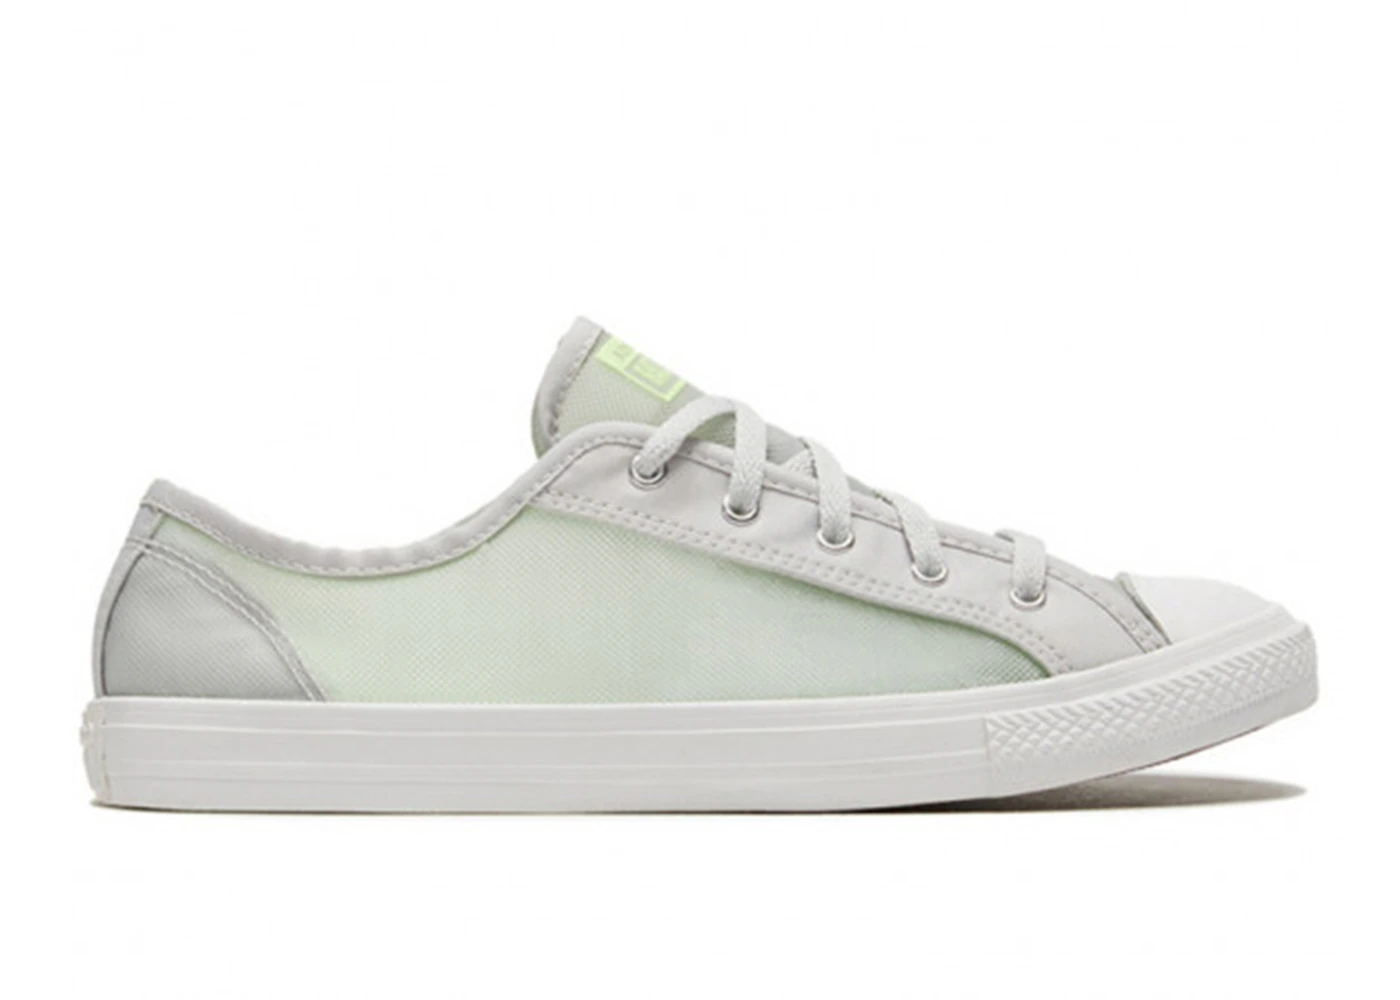 Converse Chuck Taylor All Star Low Mouse Barely Volt White - 567848C - US